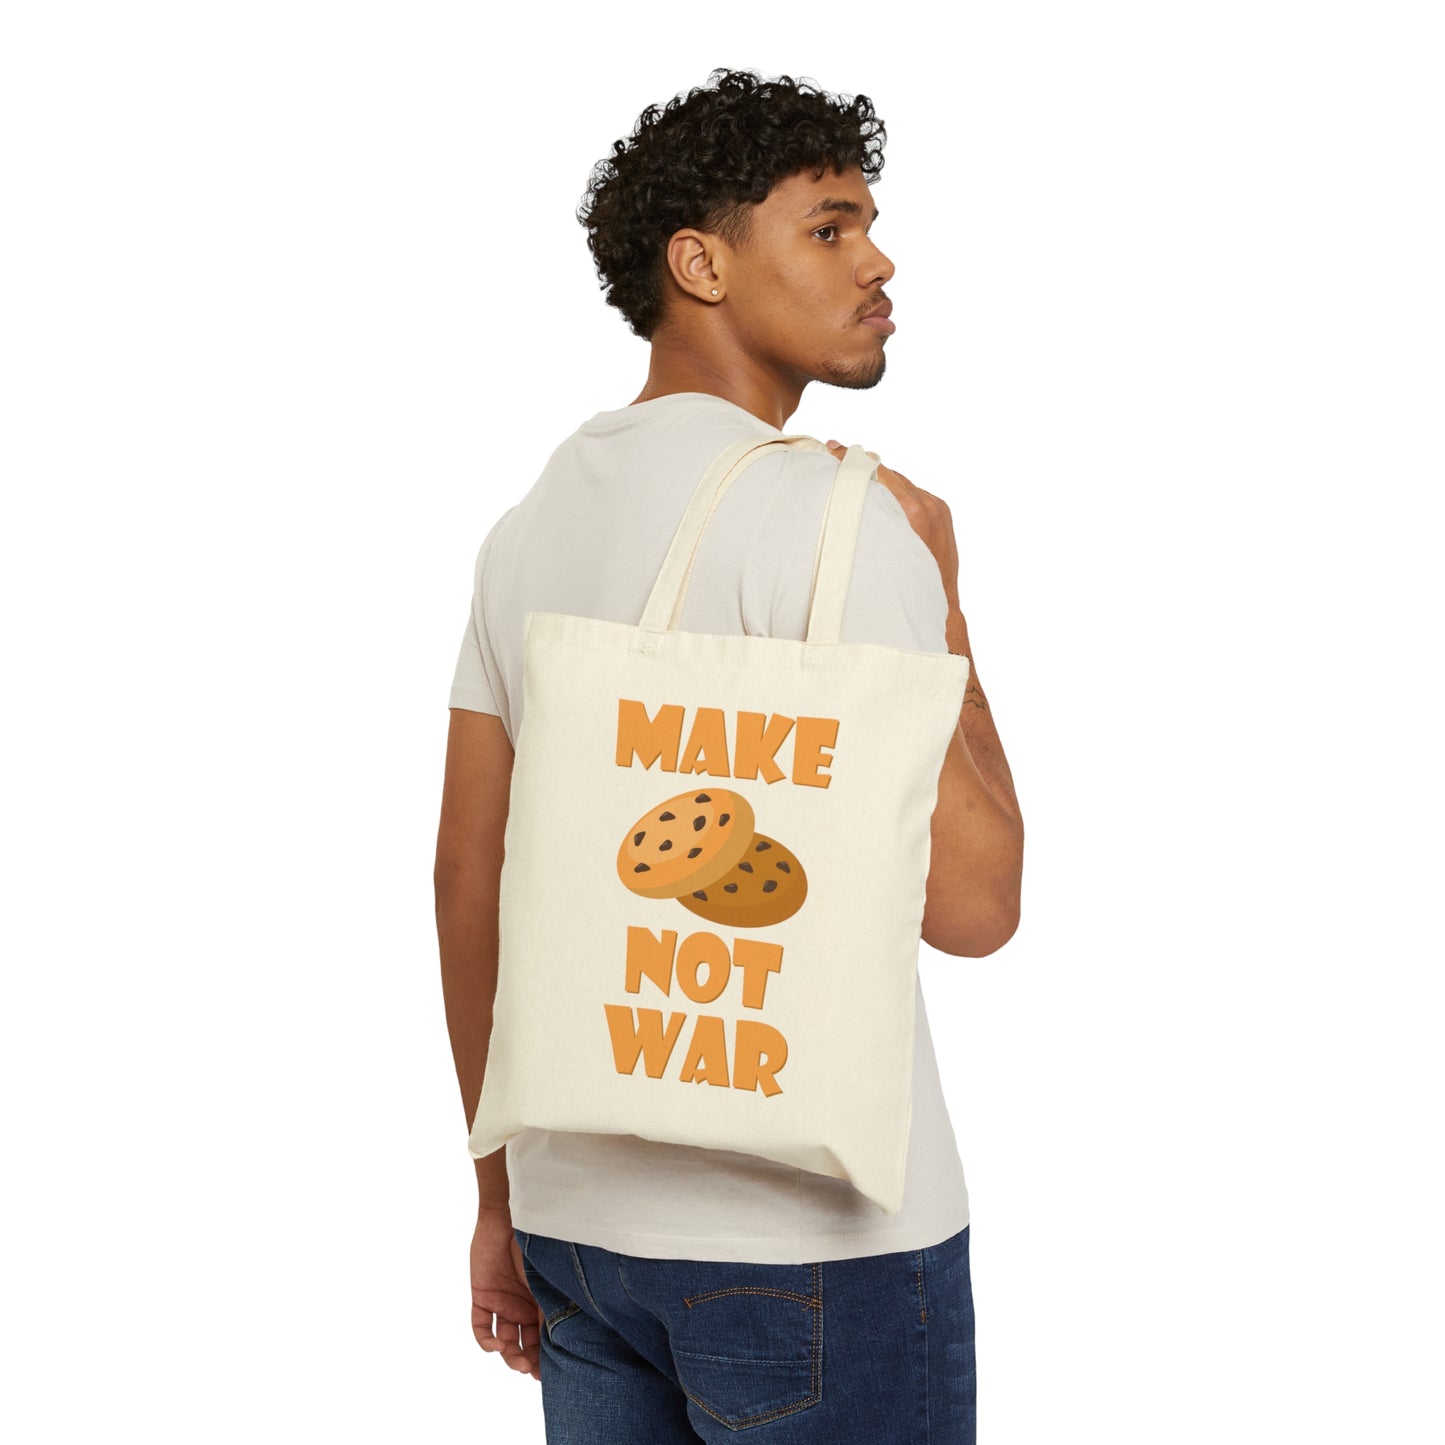 Make Oatmeal Cookies Lover Not War Christmas Canvas Shopping Cotton Tote Bag